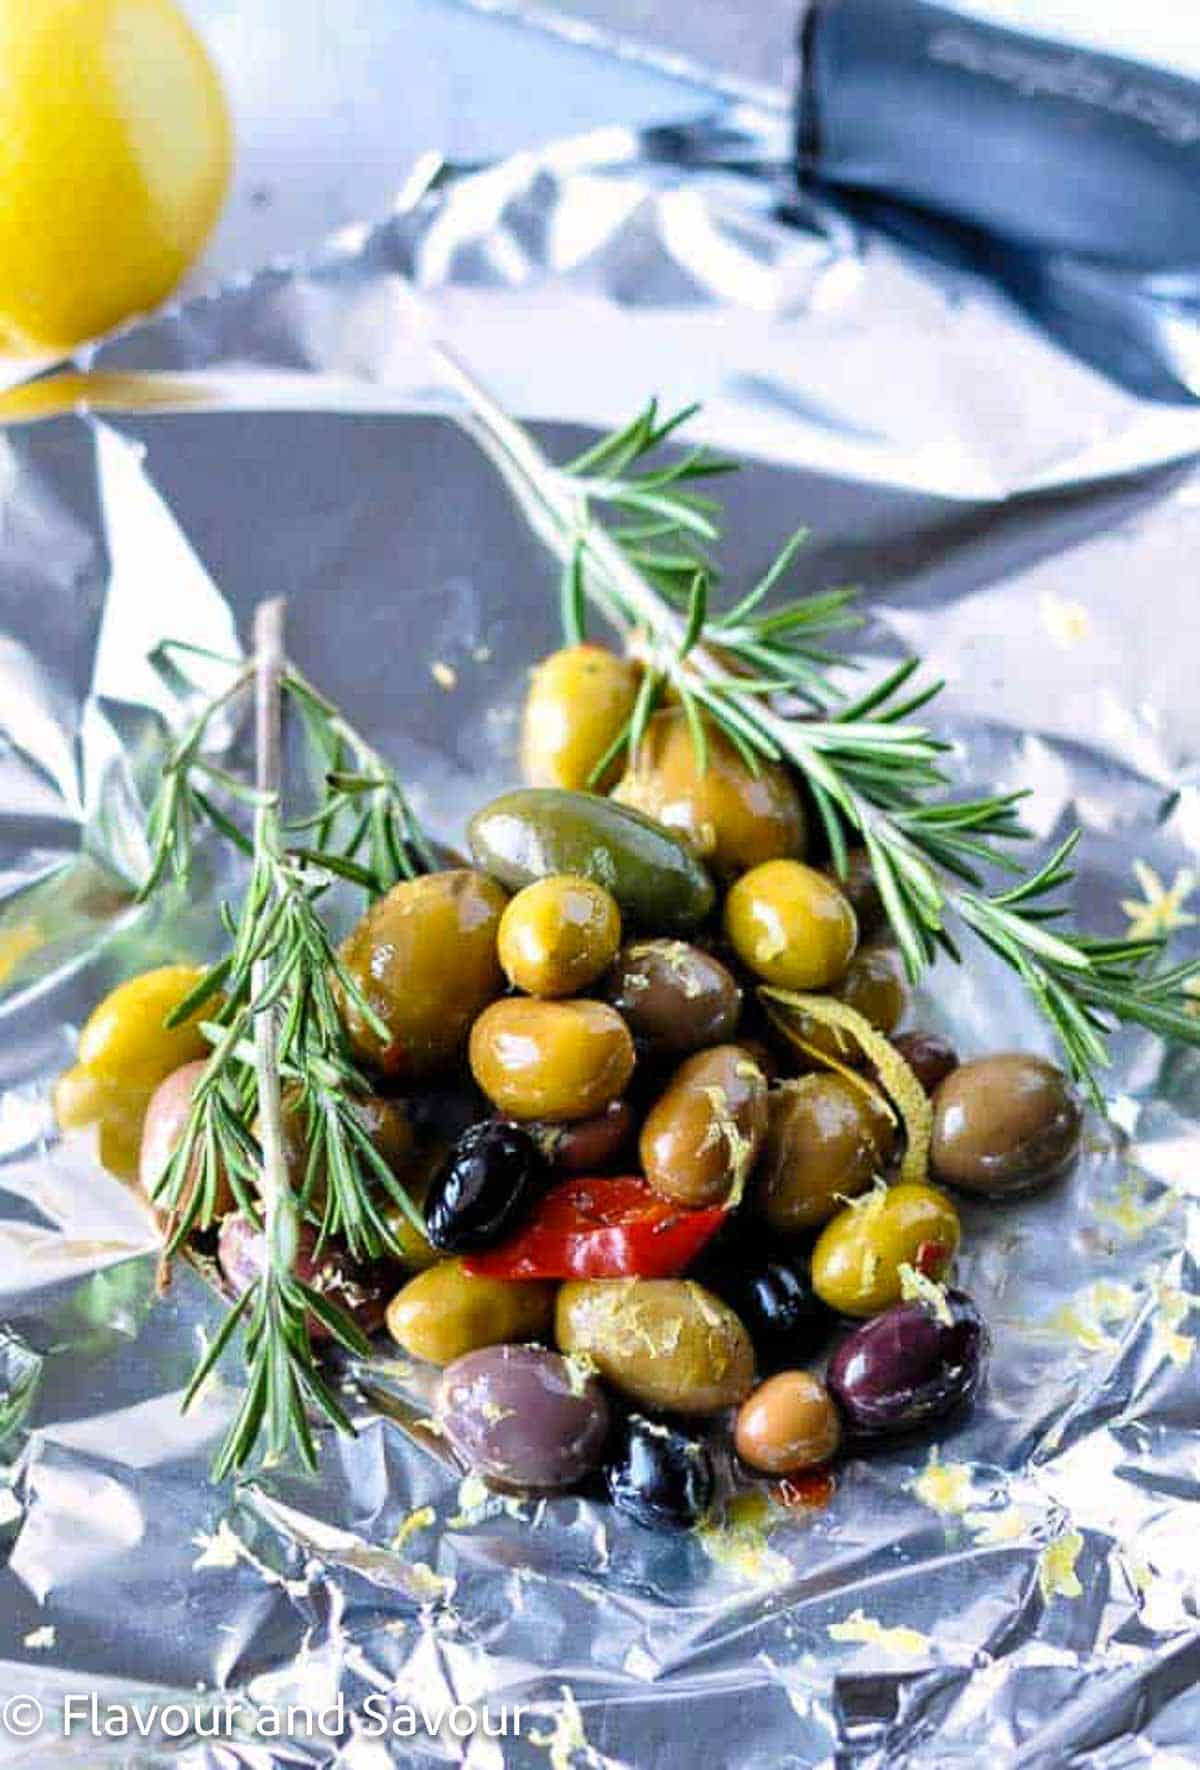 A small pile of mixed olives on a sheet of aluminum foil with fresh rosemary sprigs.